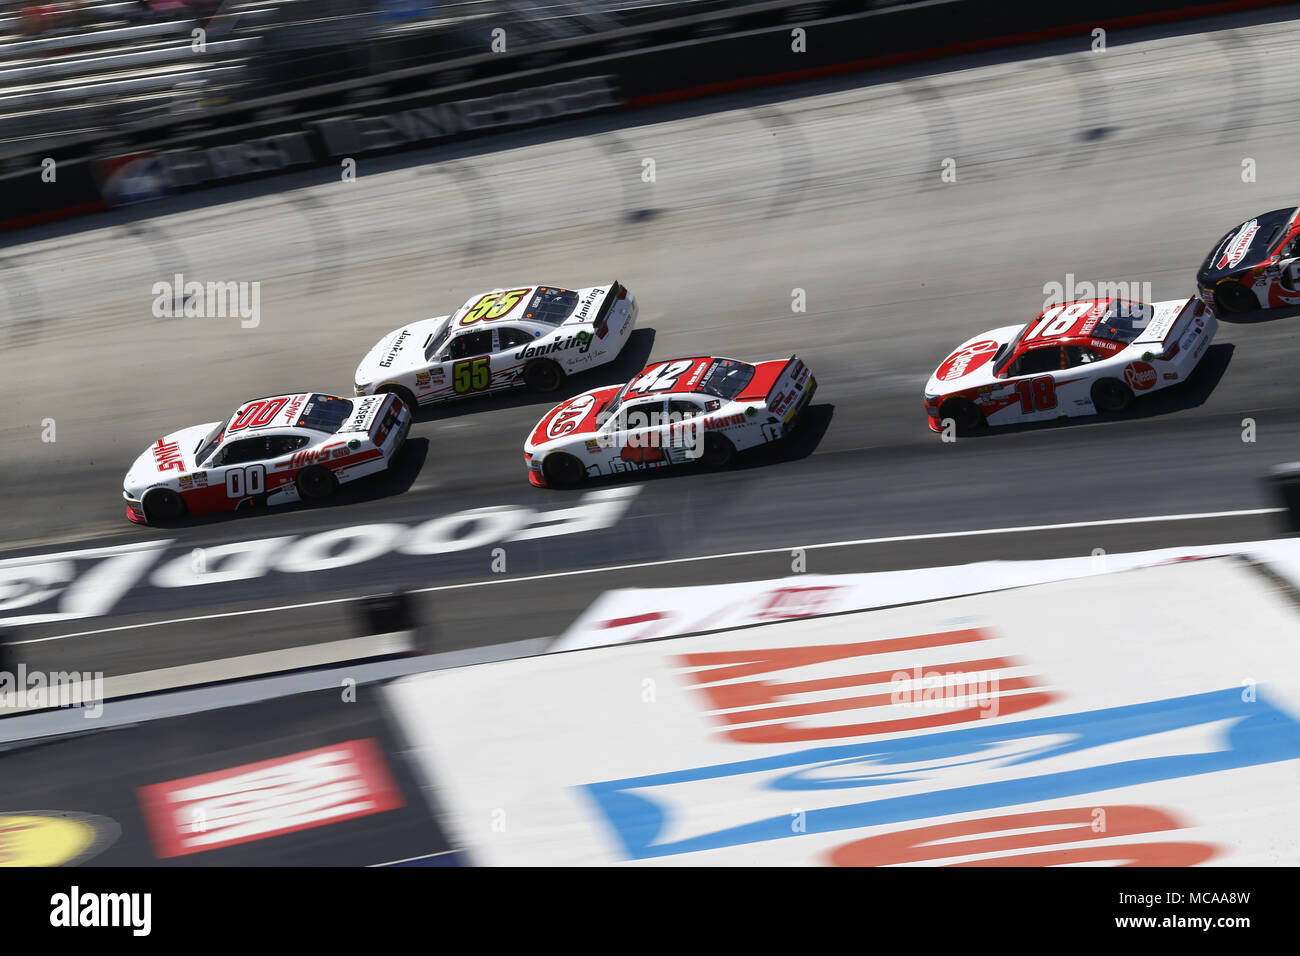 Bristol, Tennessee, USA. 14th Apr, 2018. April 14, 2018 - Bristol, Tennessee, USA: Cole Custer (00), Stephen Leicht (55), John Hunter Nemechek (42) and Ryan Preece (18) battle for position during the Fitzgerald Glider Kits 300 at Bristol Motor Speedway in Bristol, Tennessee. Credit: Chris Owens Asp Inc/ASP/ZUMA Wire/Alamy Live News Stock Photo